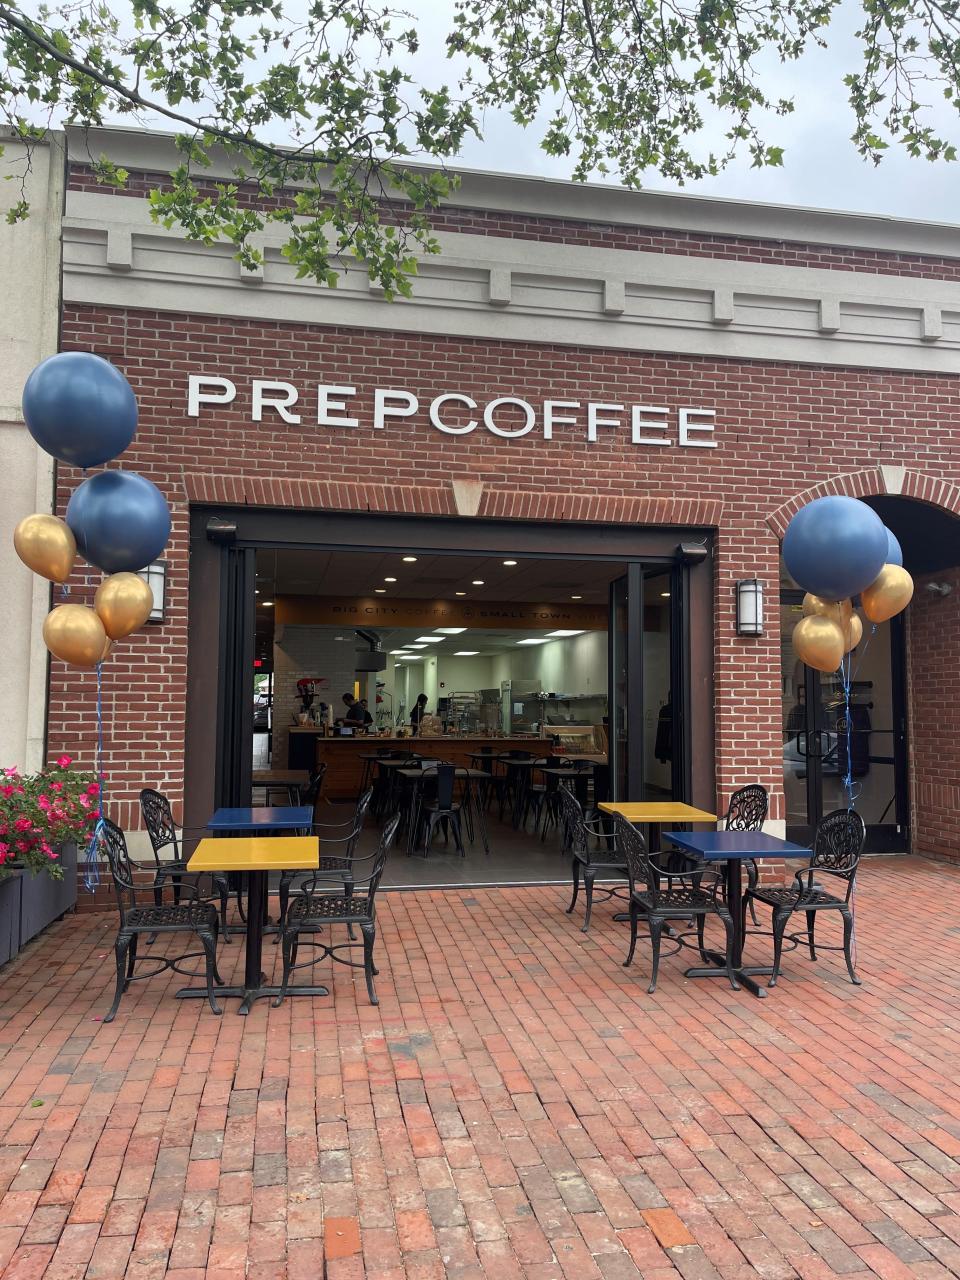 Prep Coffee on Broad Street in Red Bank is one of more than two dozen borough businesses taking part in this weekend's Cocoa Crawl.